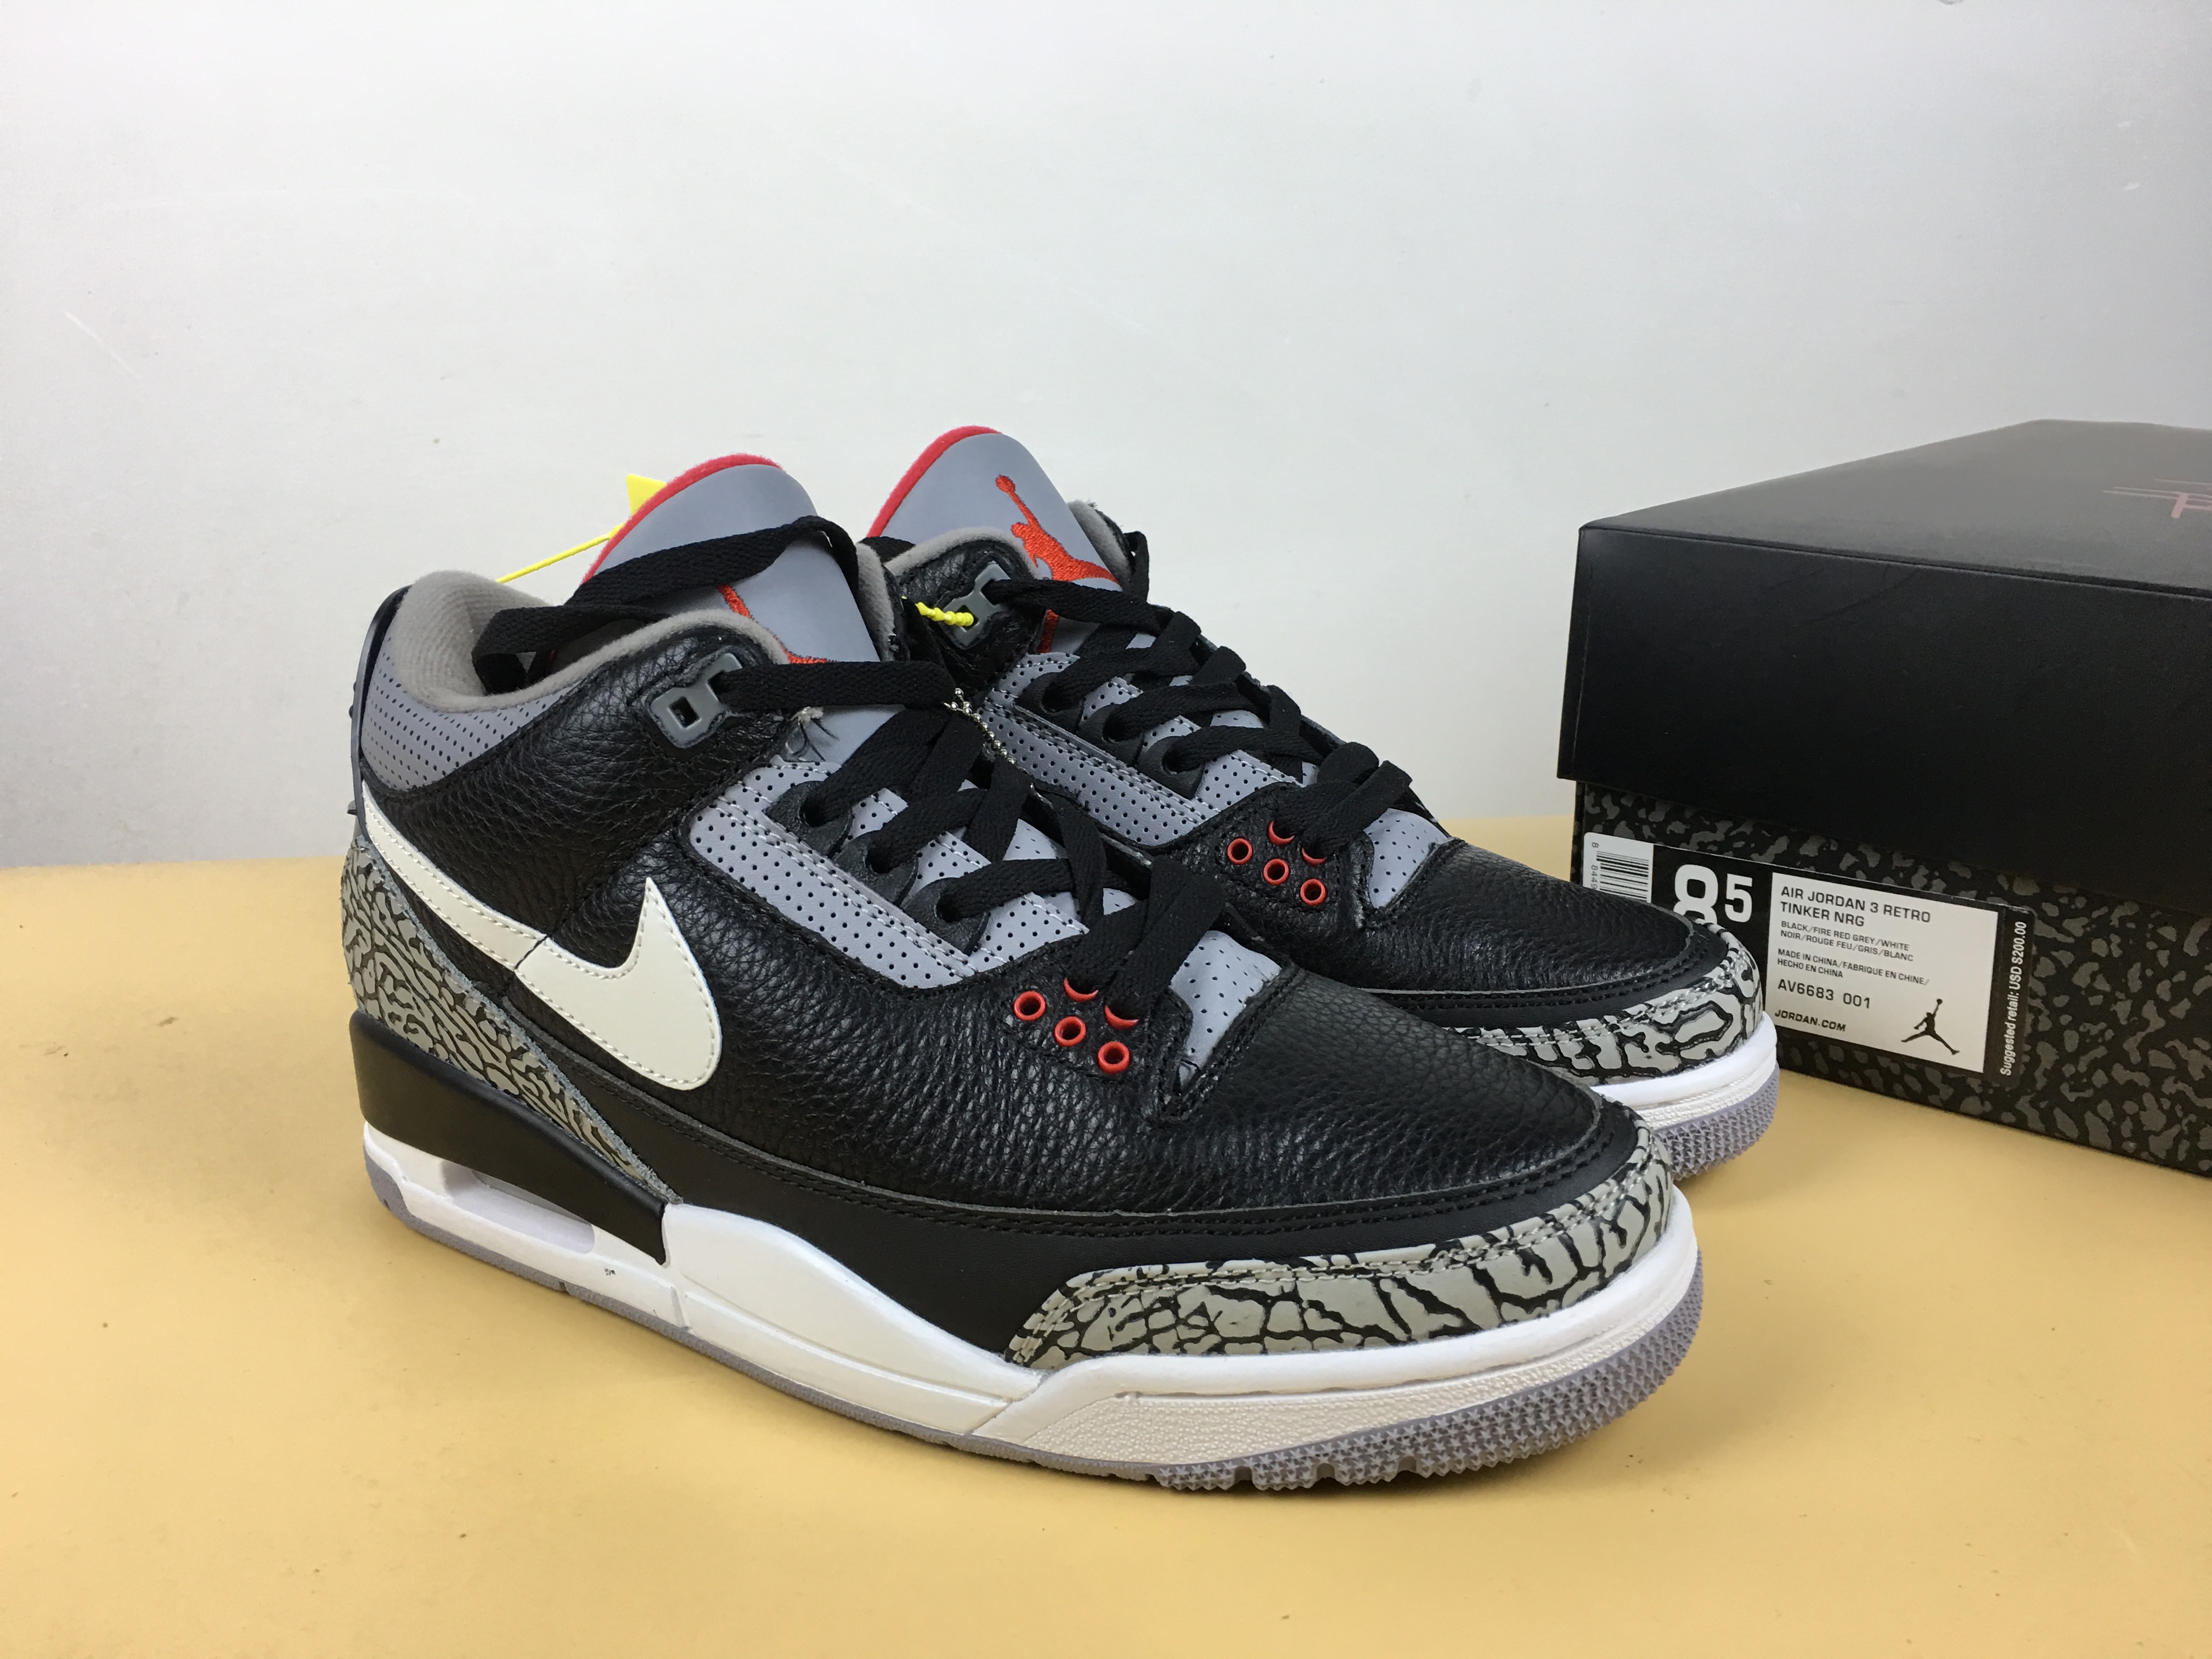 Air Jordan 3 JTH Black Cement Grey White Shoes - Click Image to Close